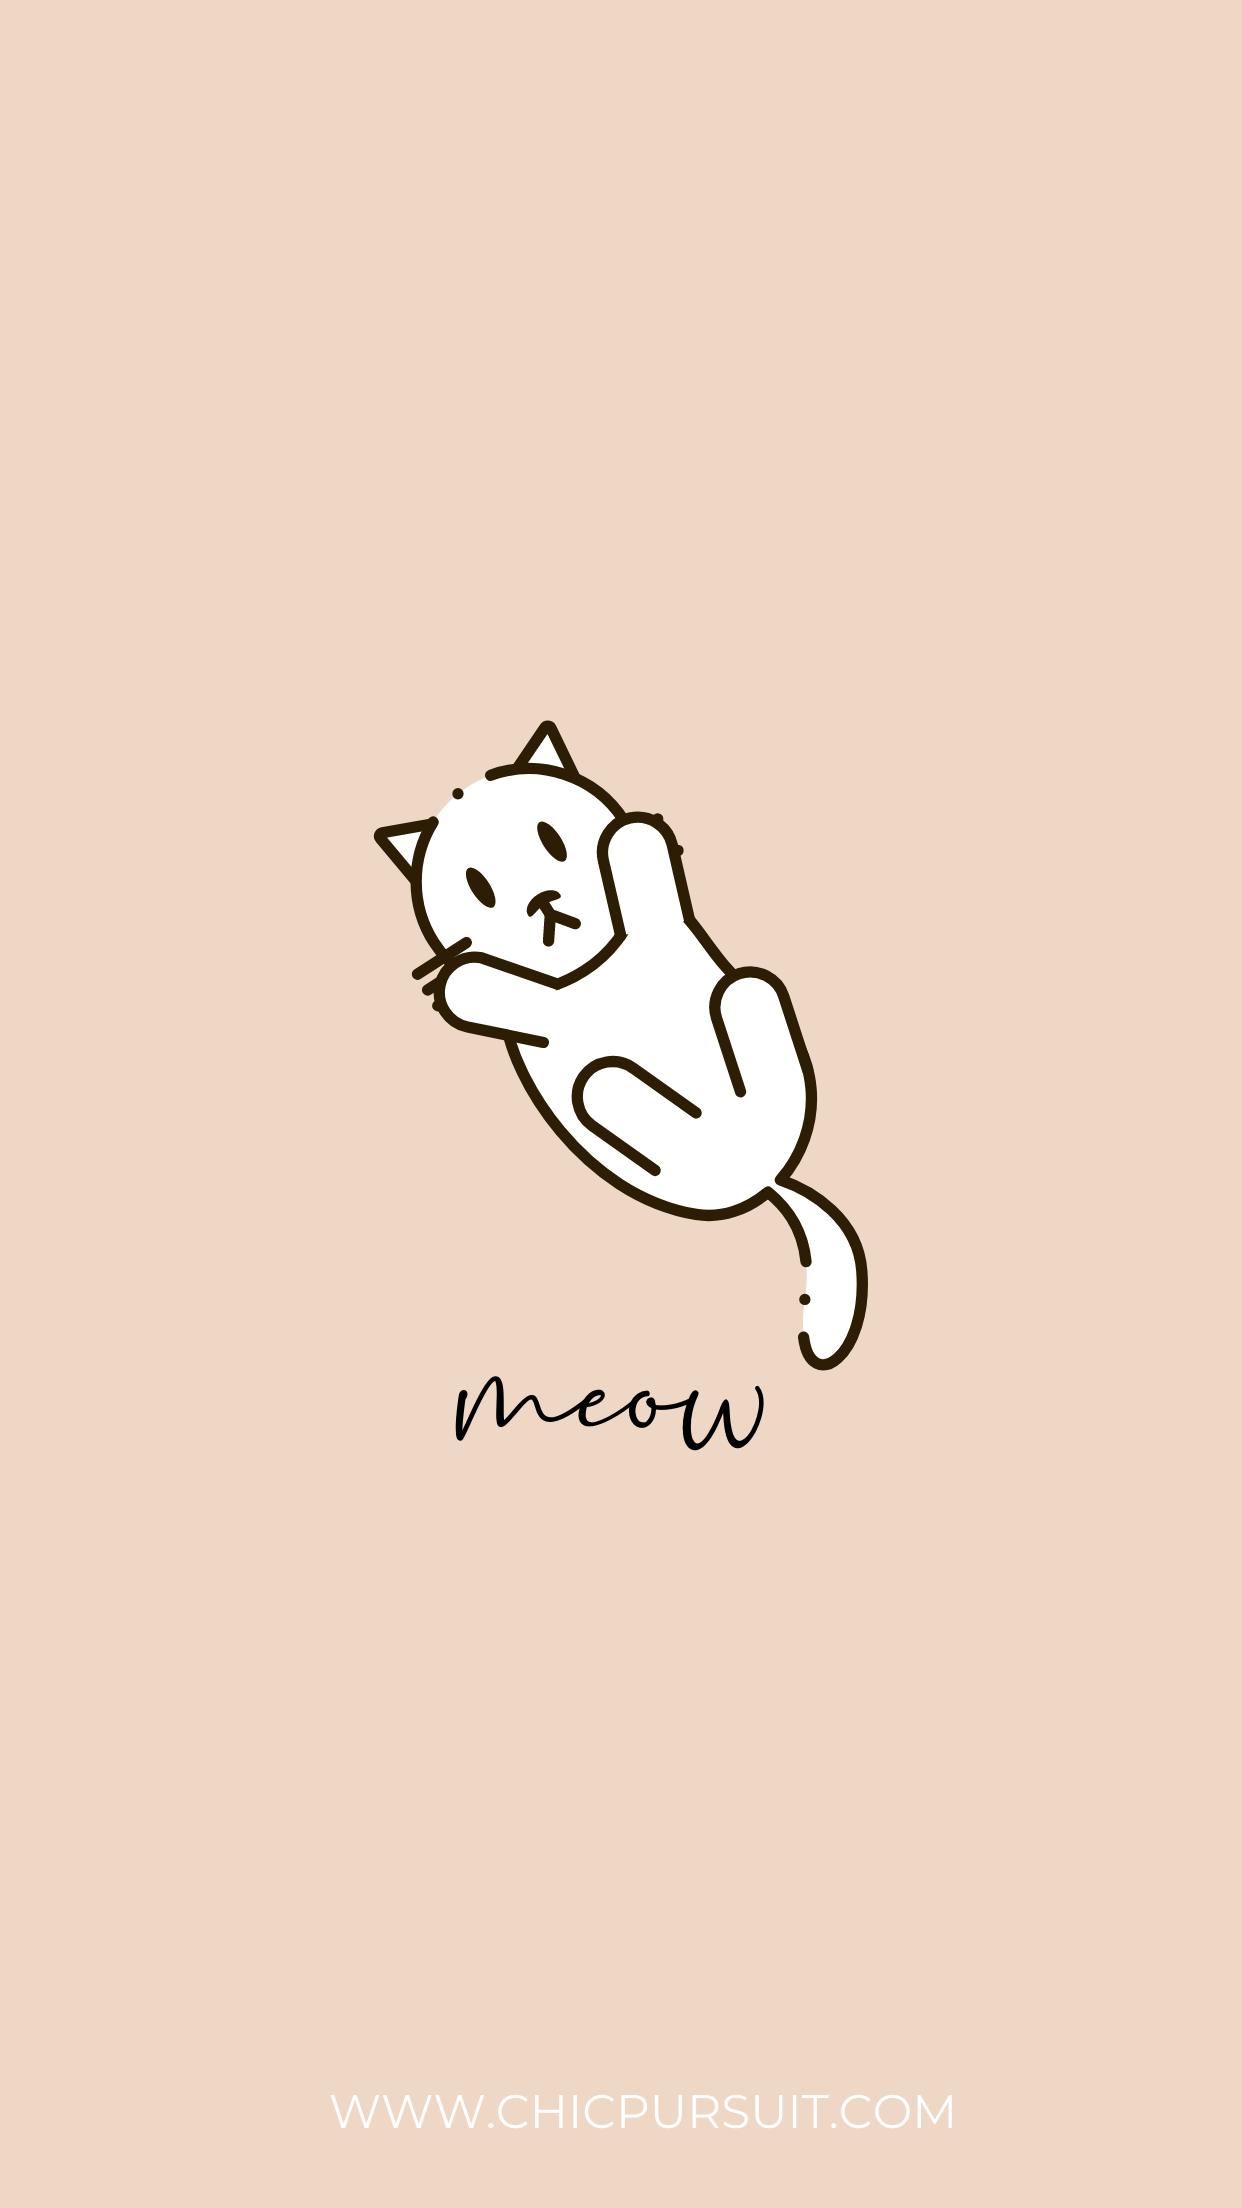 Cute cat illustration wallpaper for phone with the word 